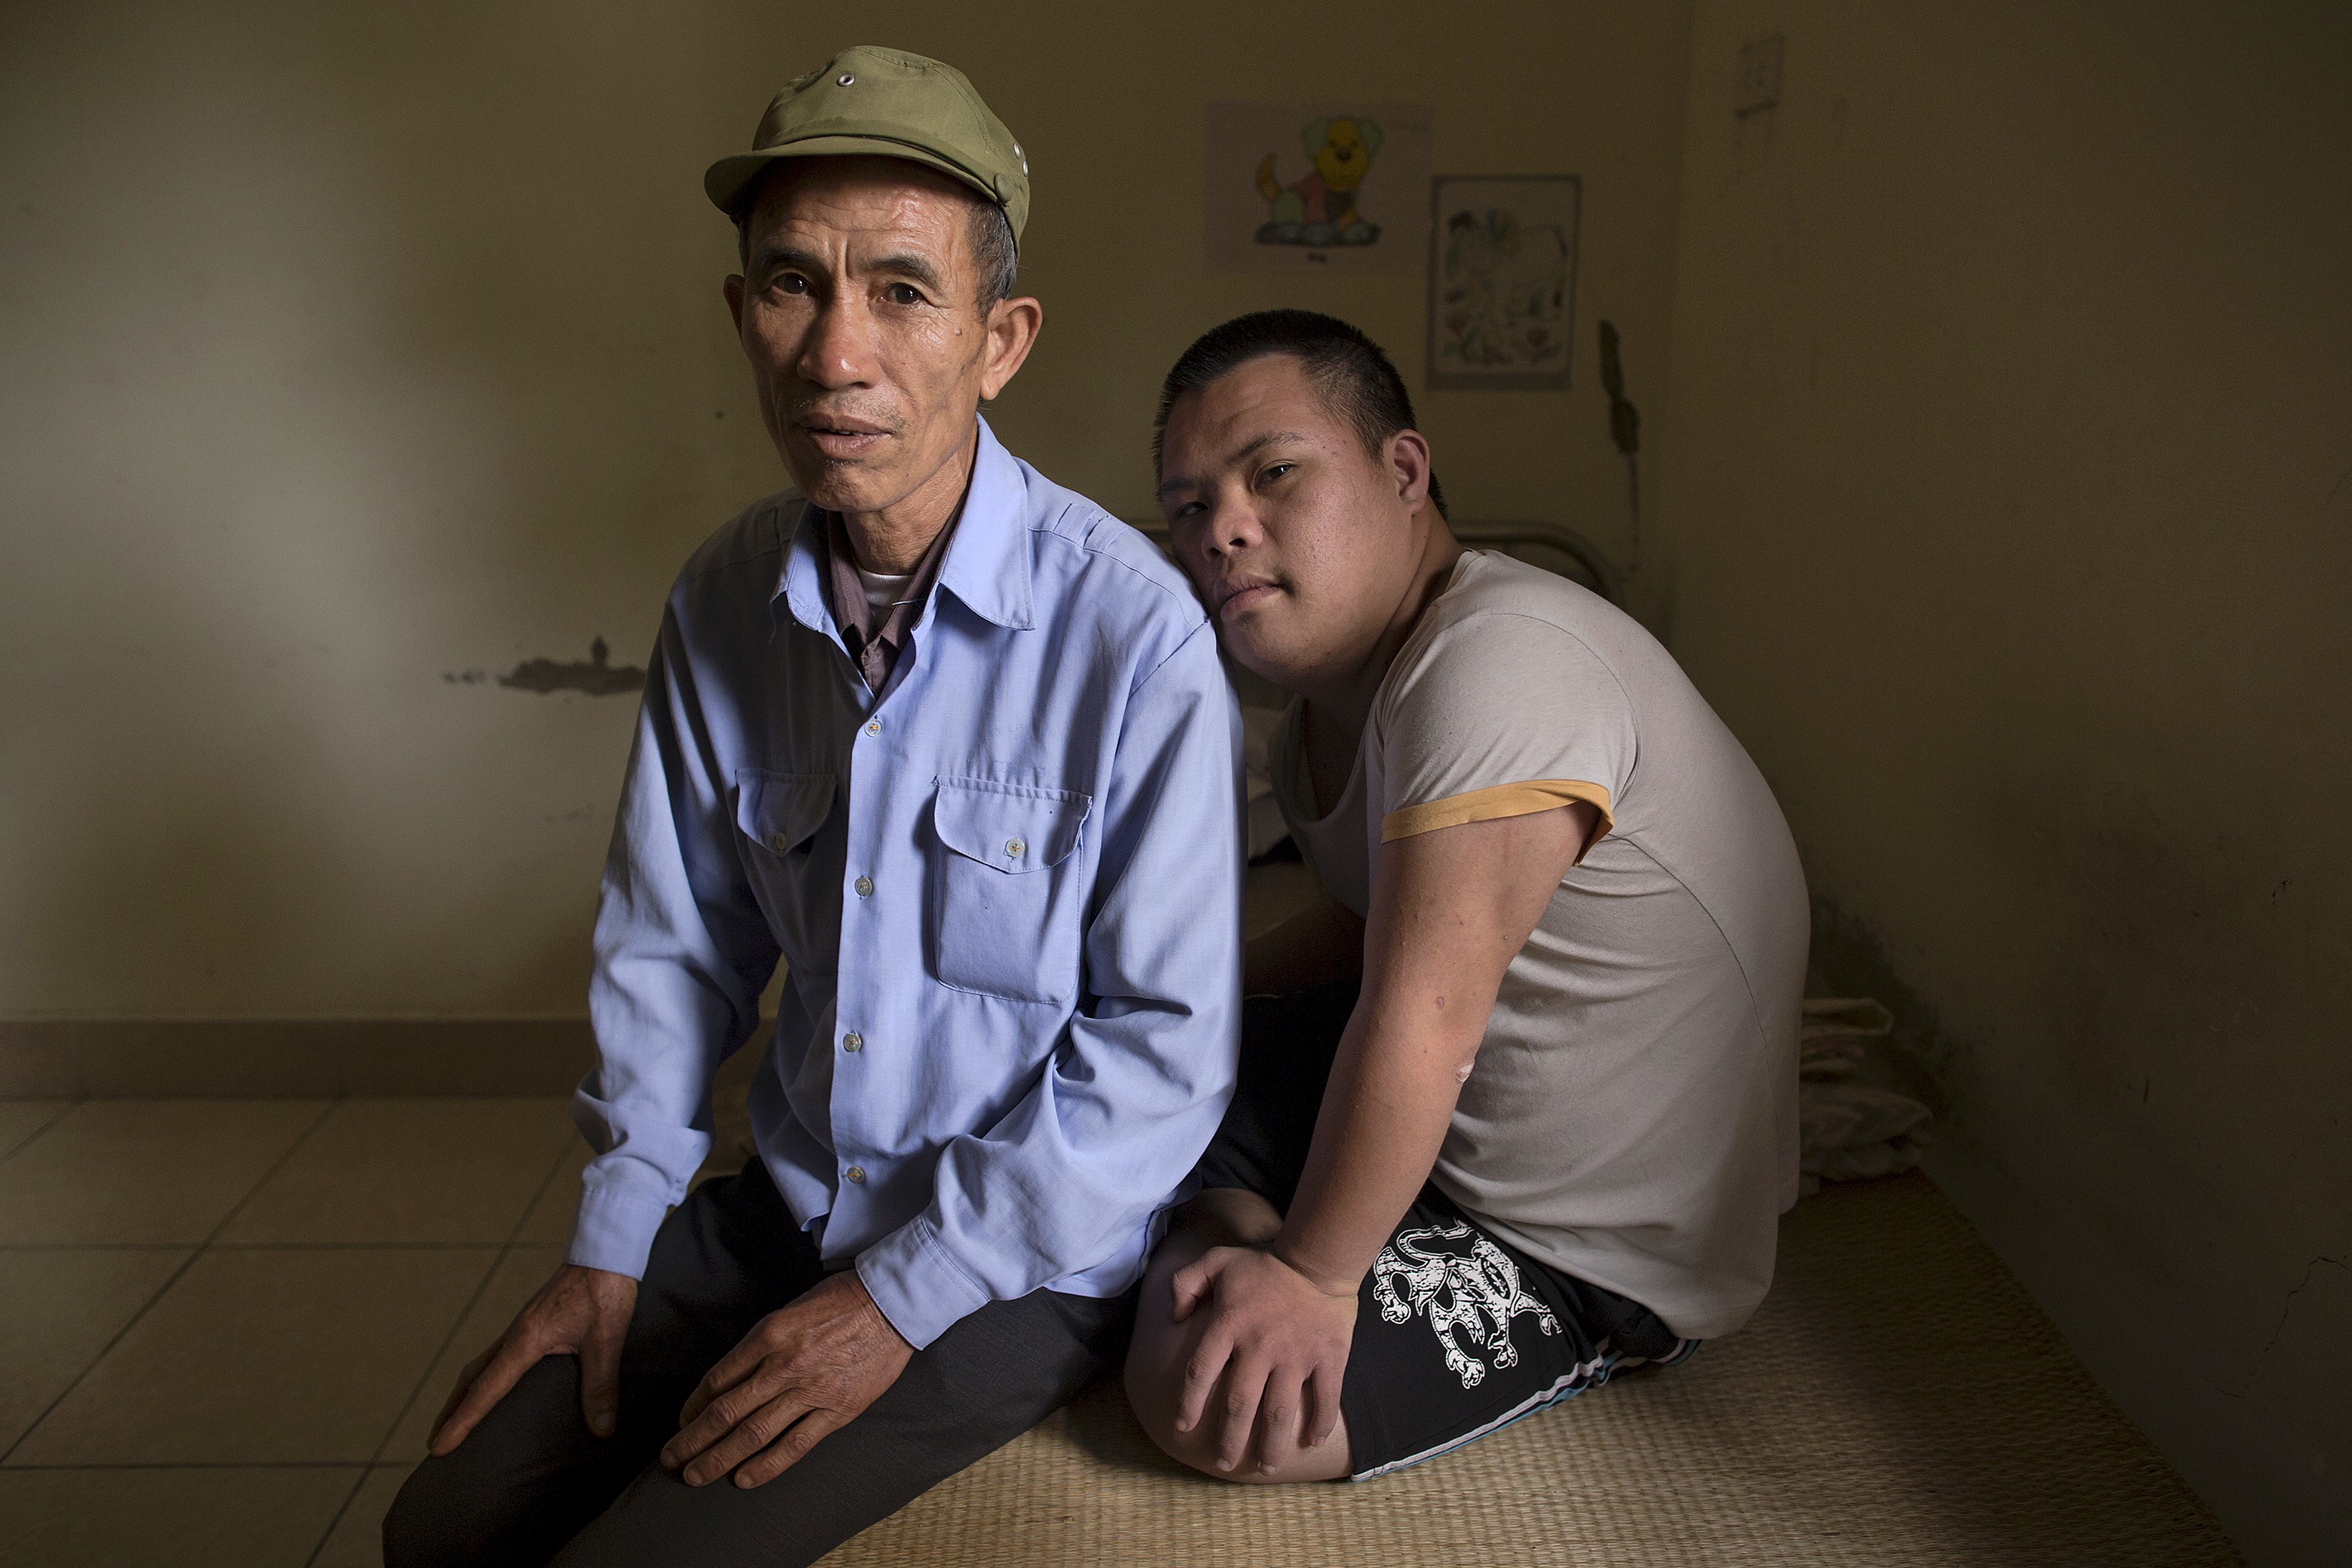 3-year-old former soldier, Nguyen Hong Phuc, sits on the bed with his son Nguyen Dinh Loc, 20, who is recovering from tumour surgery at Friendship village, a hospice for Agent Orange victims, outside Hanoi April 8, 2015. Nguyen Dinh Loc has serious mental and physical problems that his family and doctors link to his father's exposure to Agent Orange. His father joined the military after the U.S. army stopped using Agent Orange in 1971, but lived in areas heavily contaminated by it, including near Danang airport, where the chemical defoliant was stored.